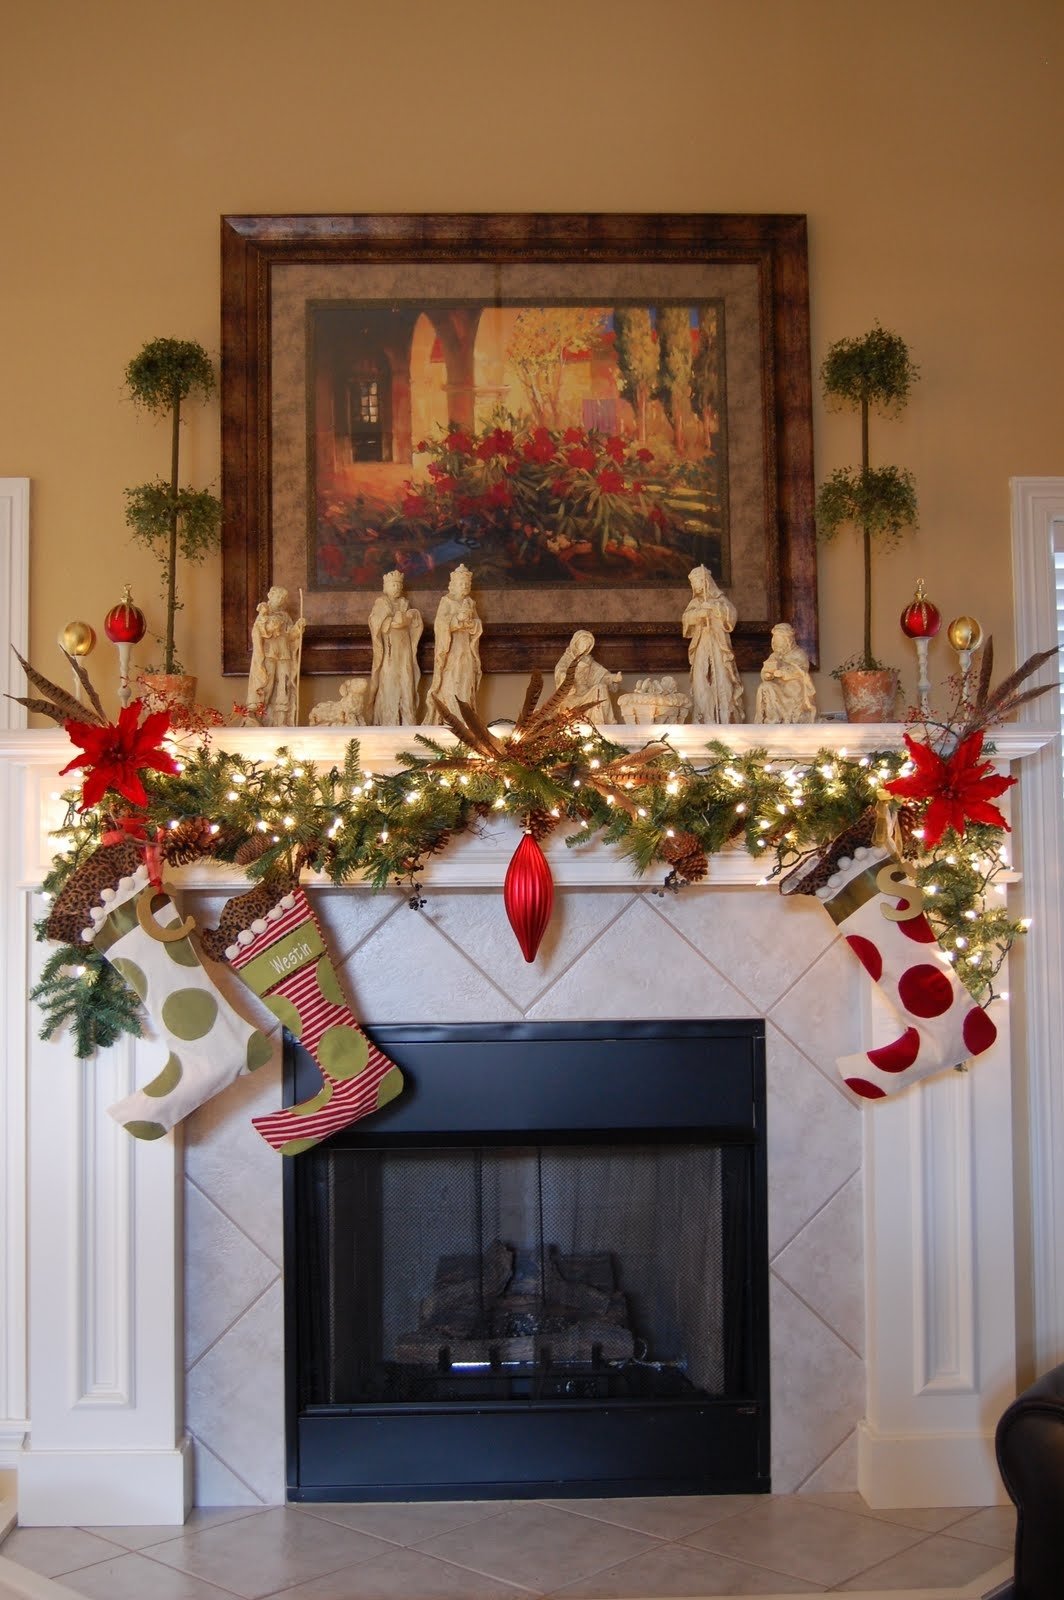 10 Pretty Fireplace Mantel Christmas Decorating Ideas Photos fireplace mantel holiday decorating ideas amys office 2022